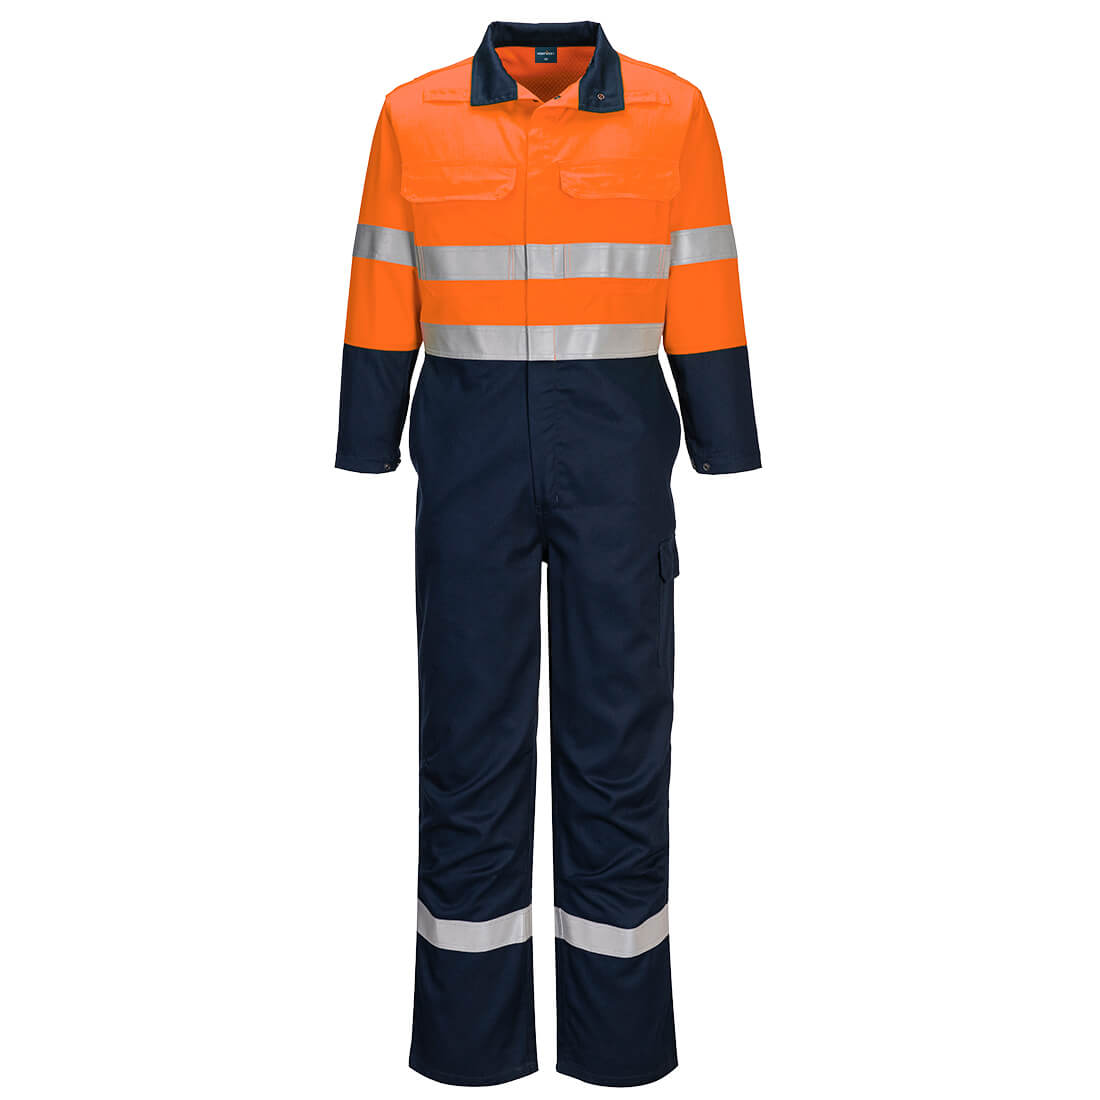 elevate safety-wear available